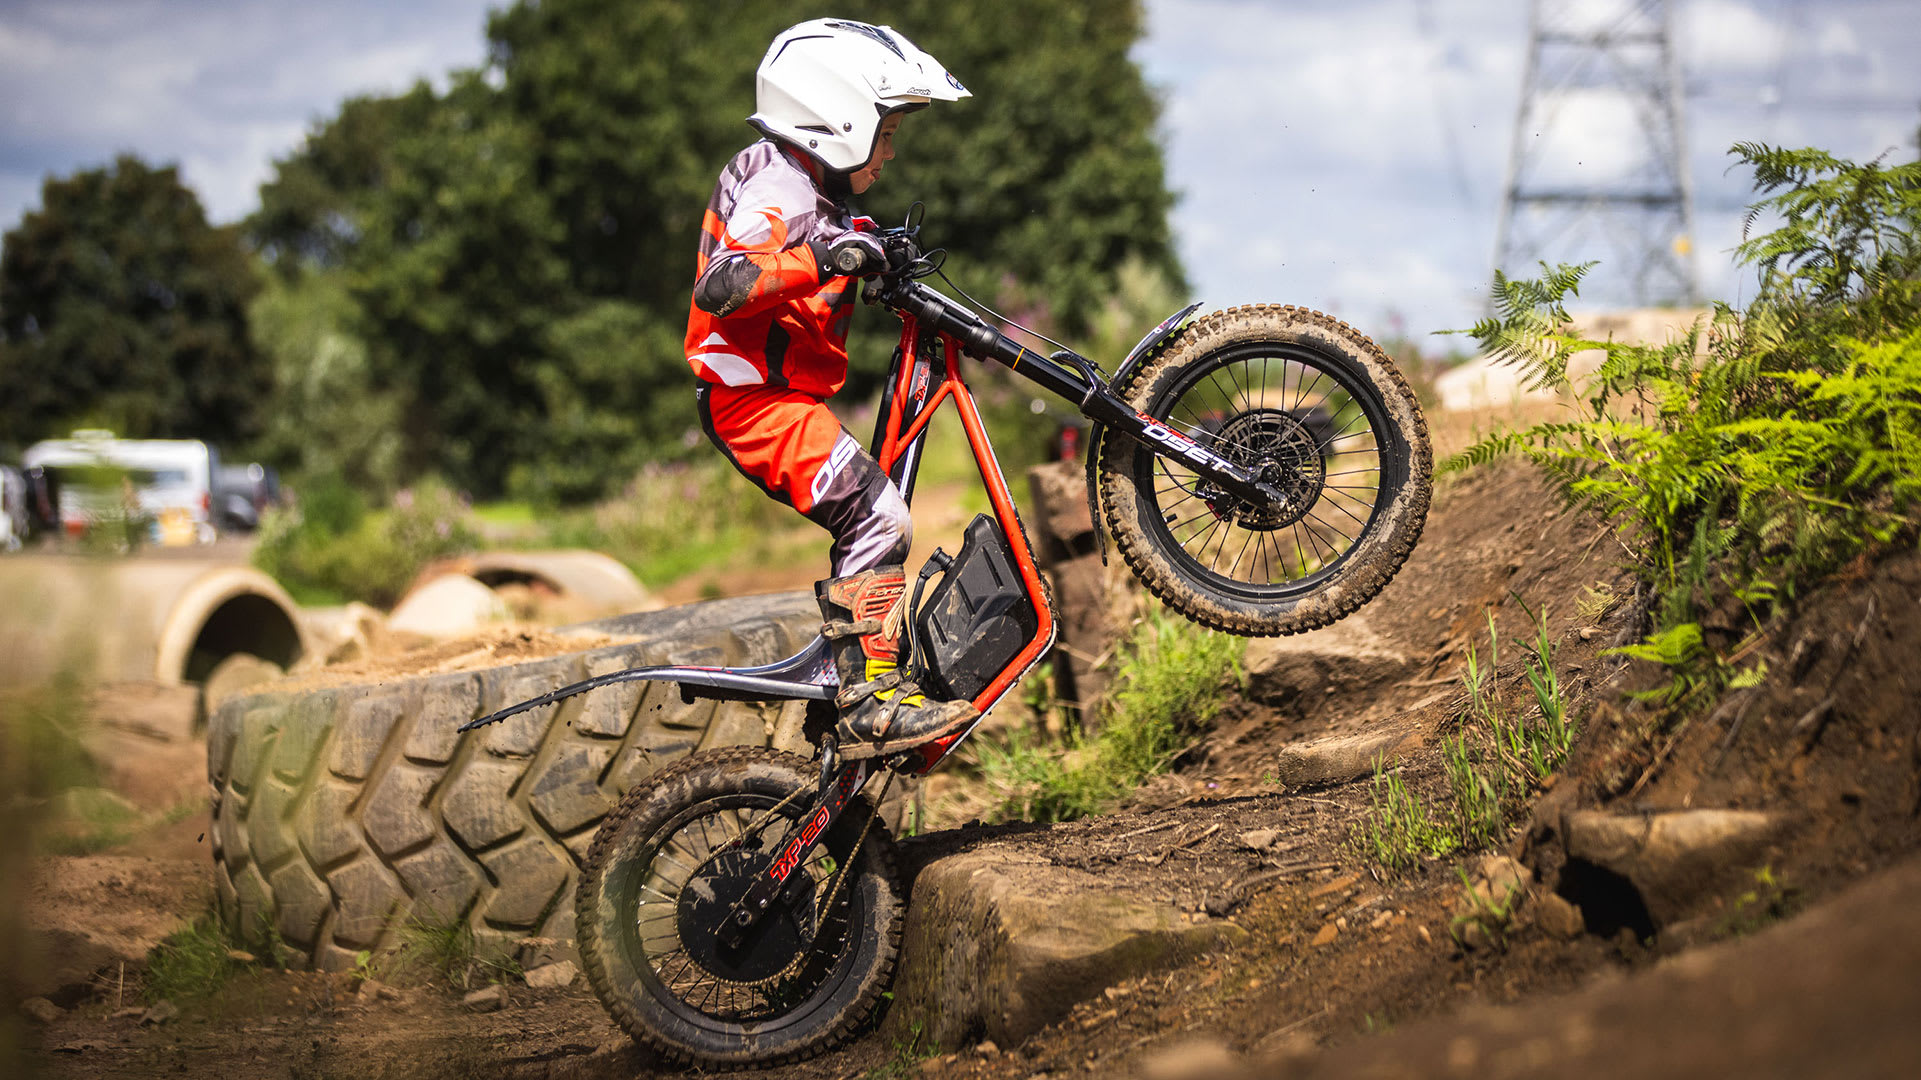 The OSET Trials Experience rider 